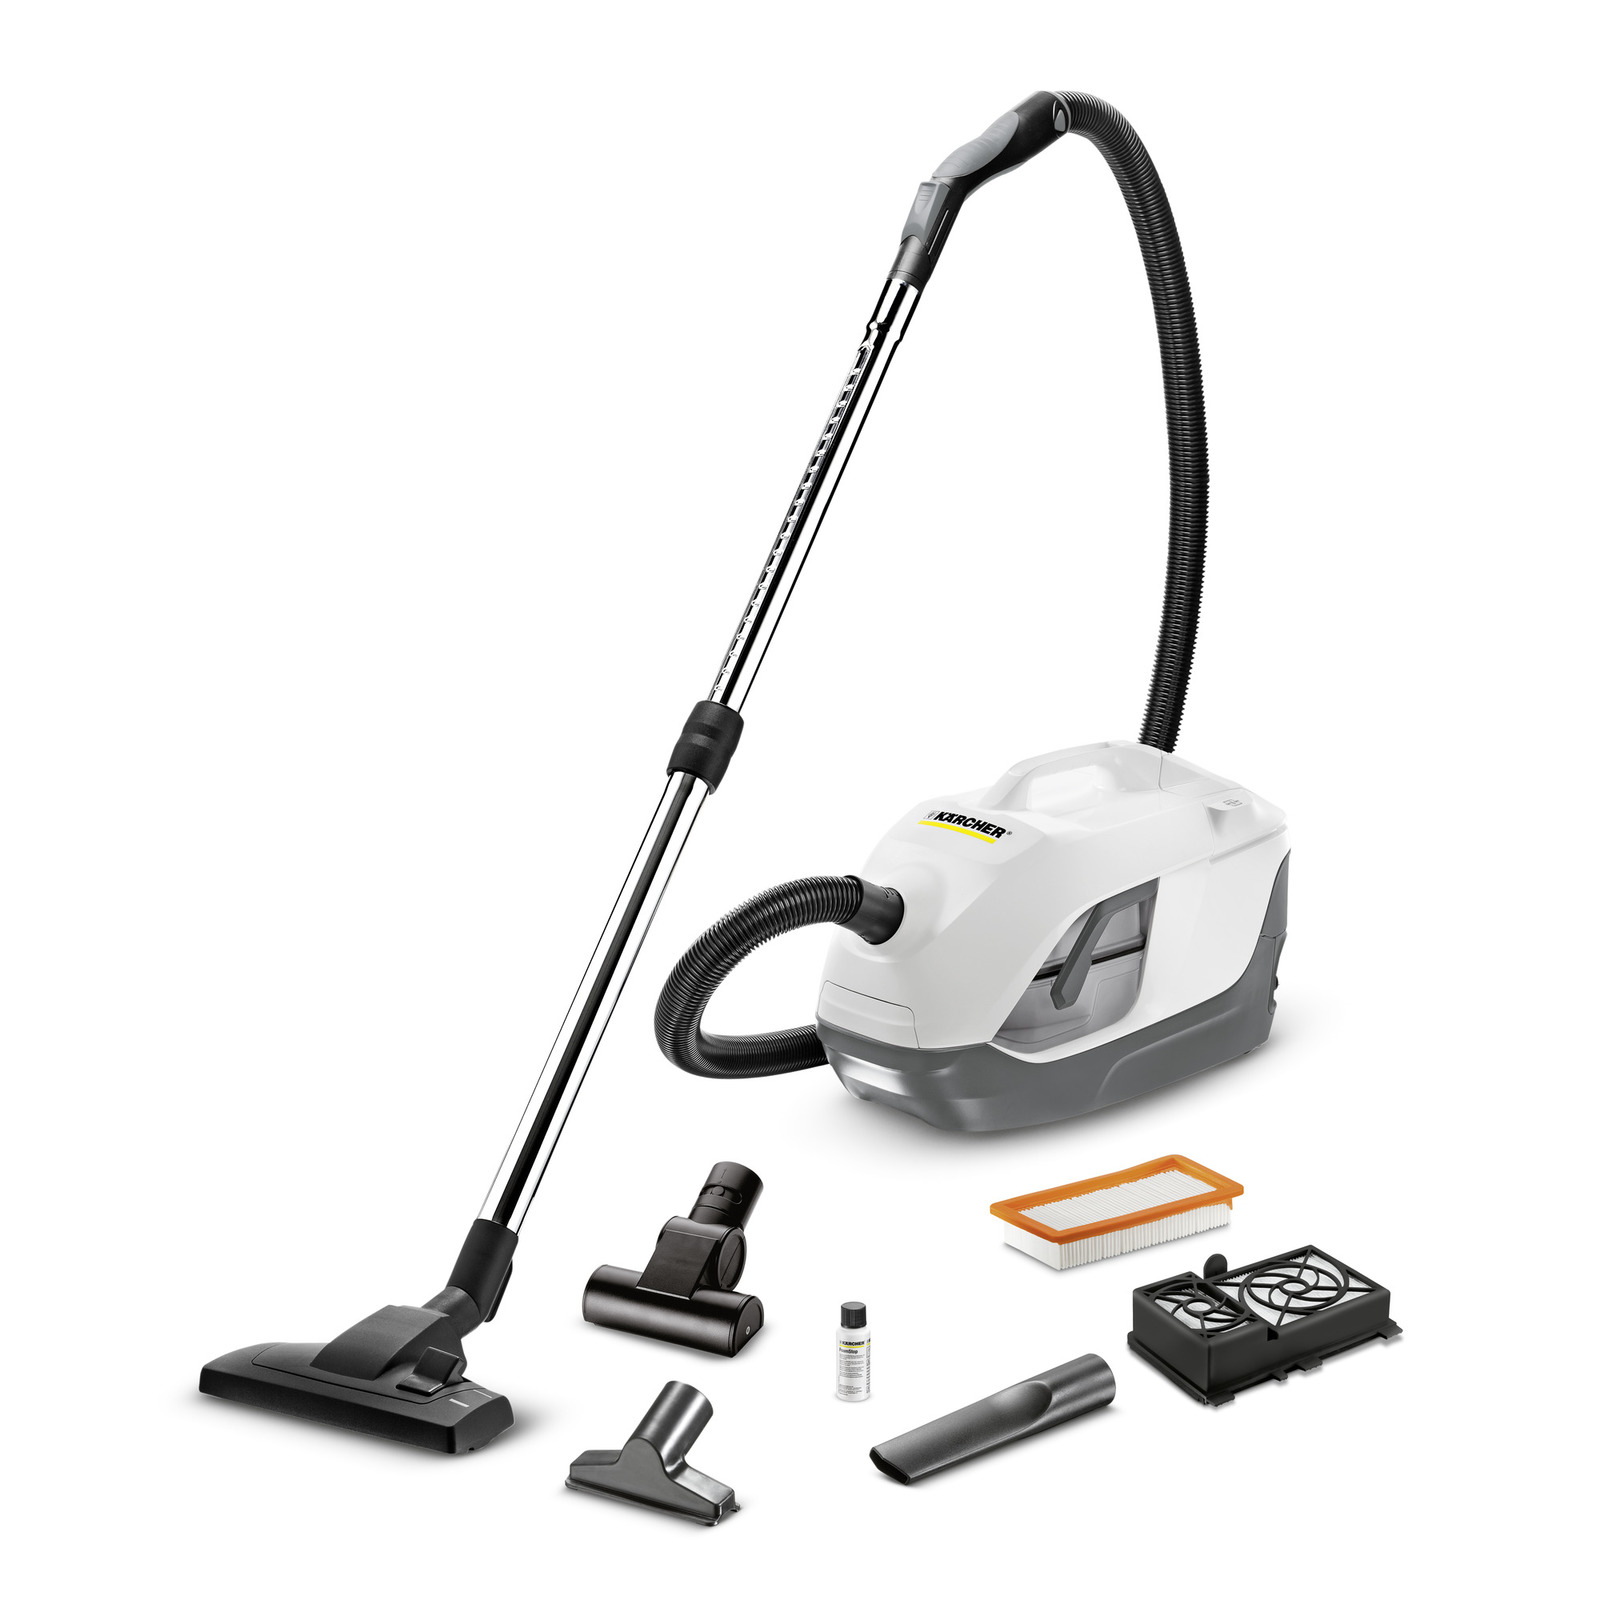 Vacuum cleaner with water filter HAEGER AQUACLEAN 1200 - HAEGER Home  Appliances